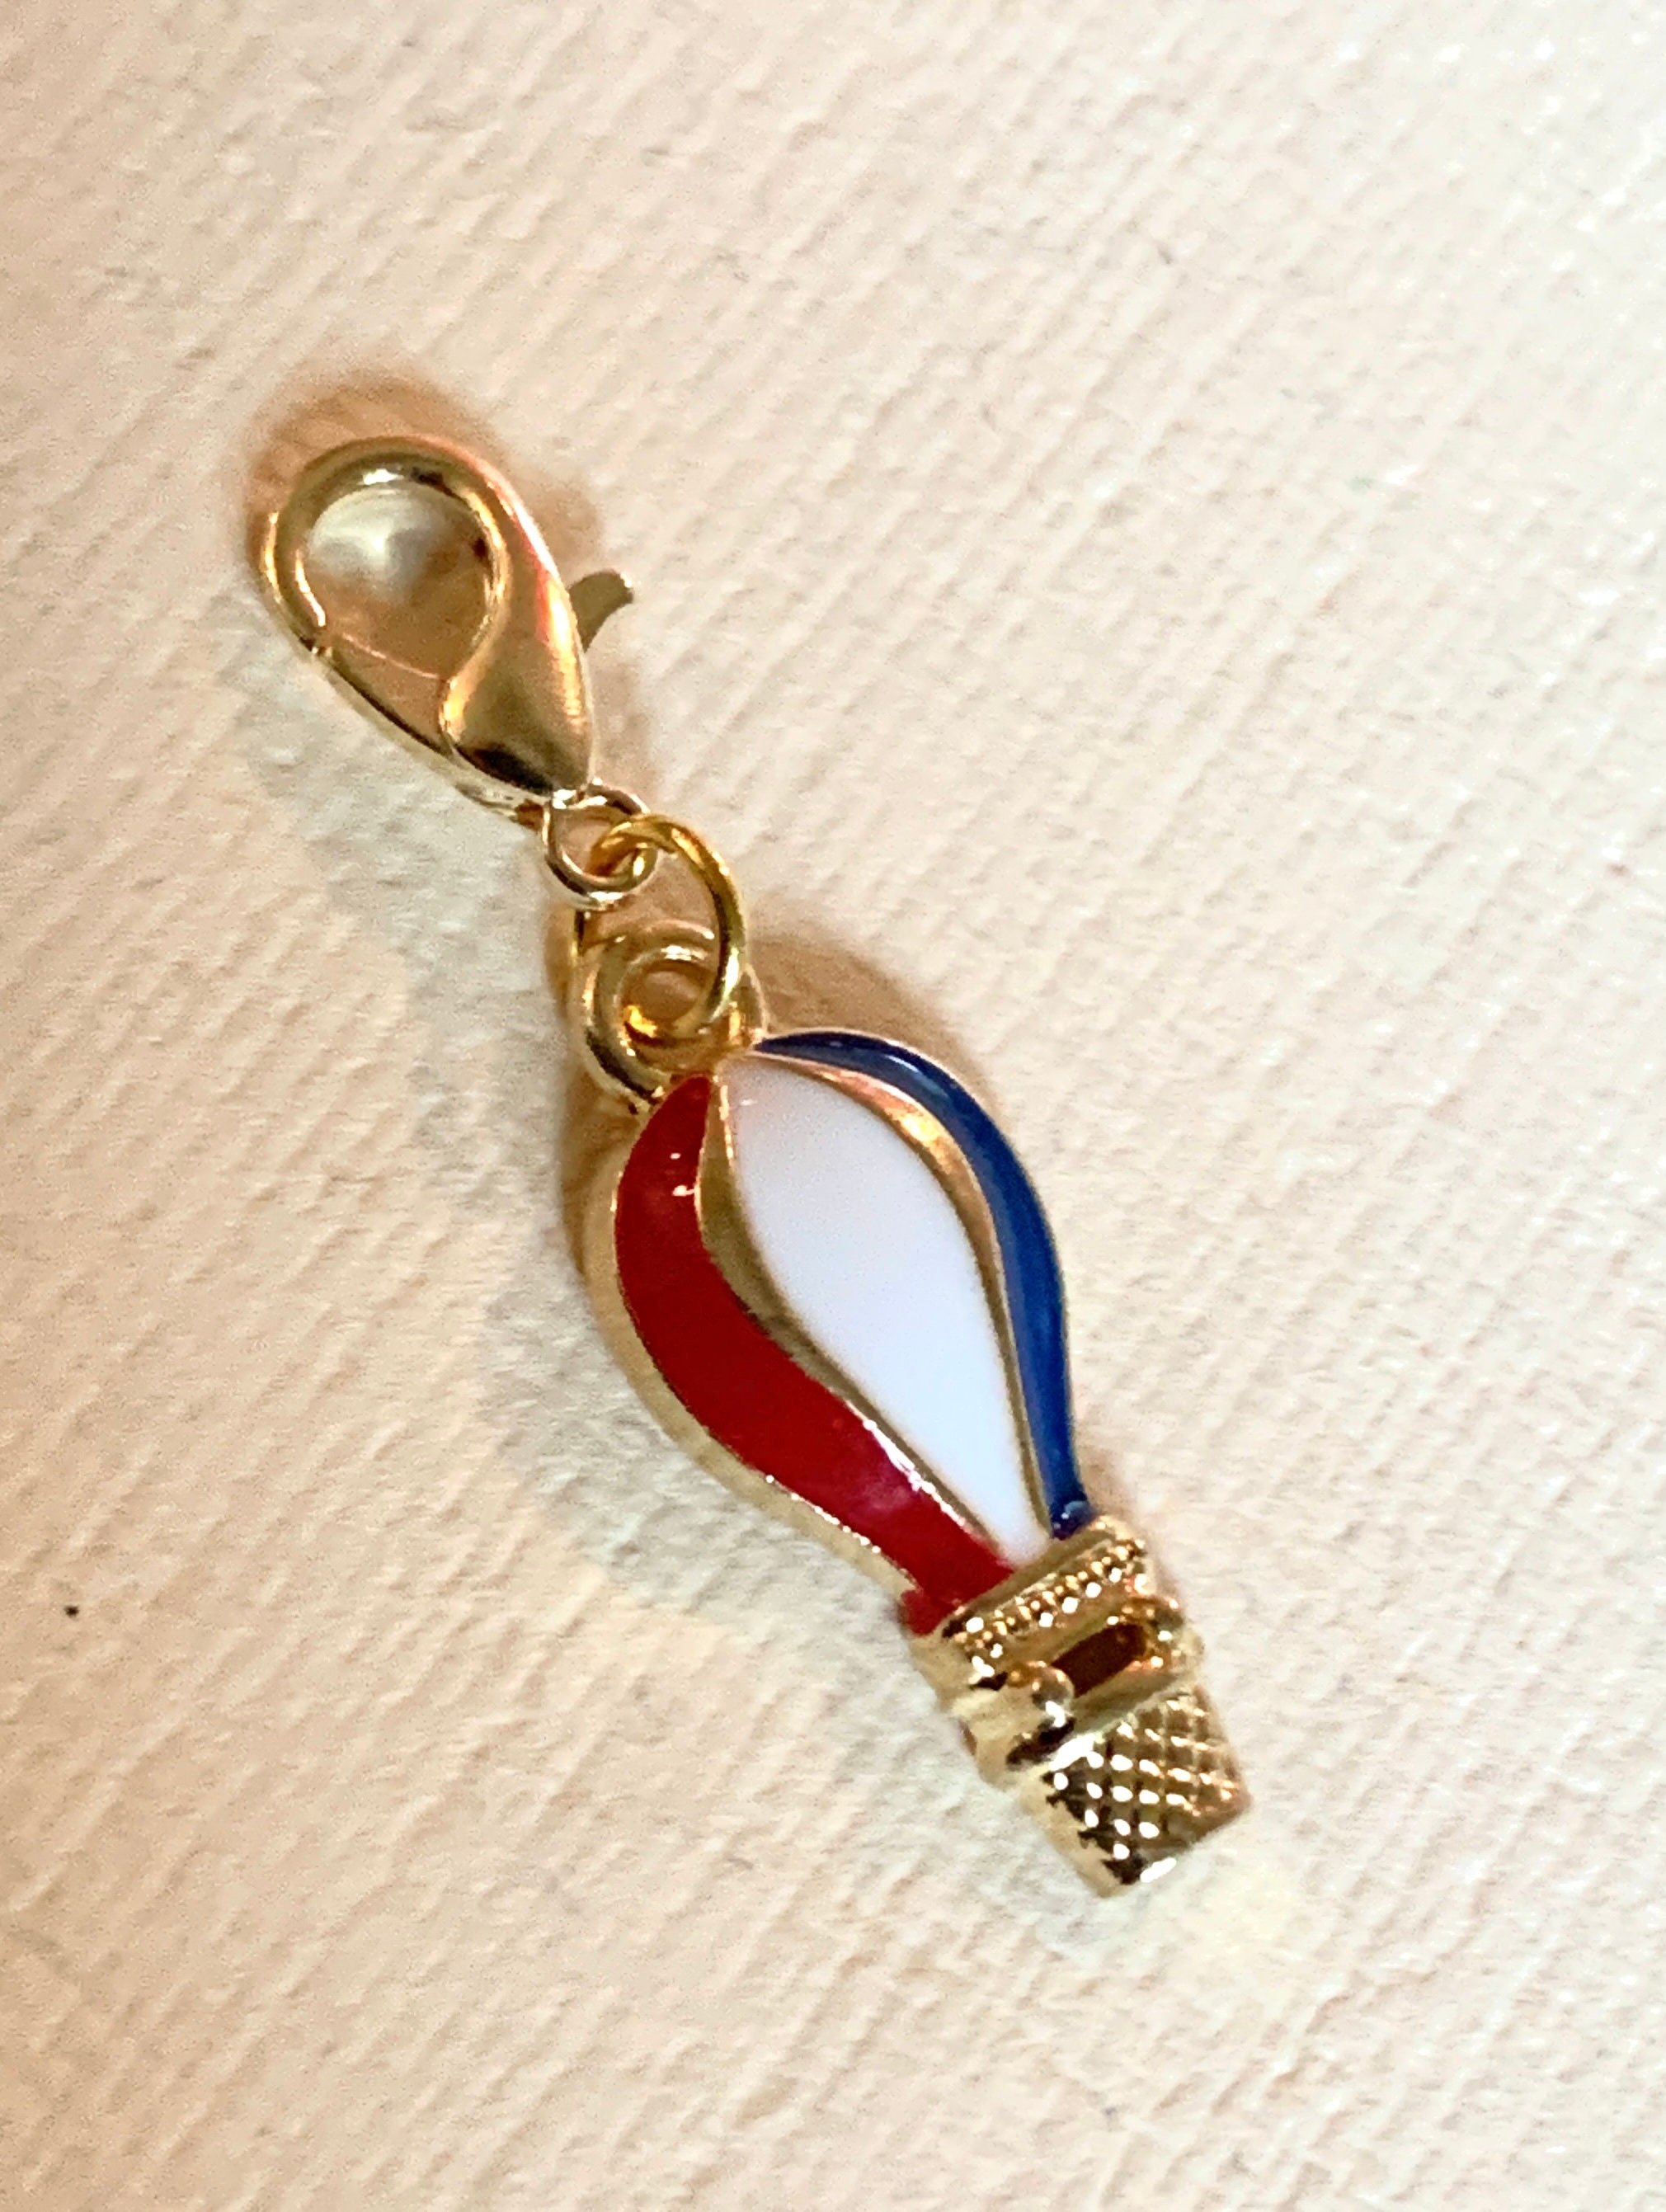 Enameled Hot Air Balloon Charm in Gold – Lagravinese Jewelers